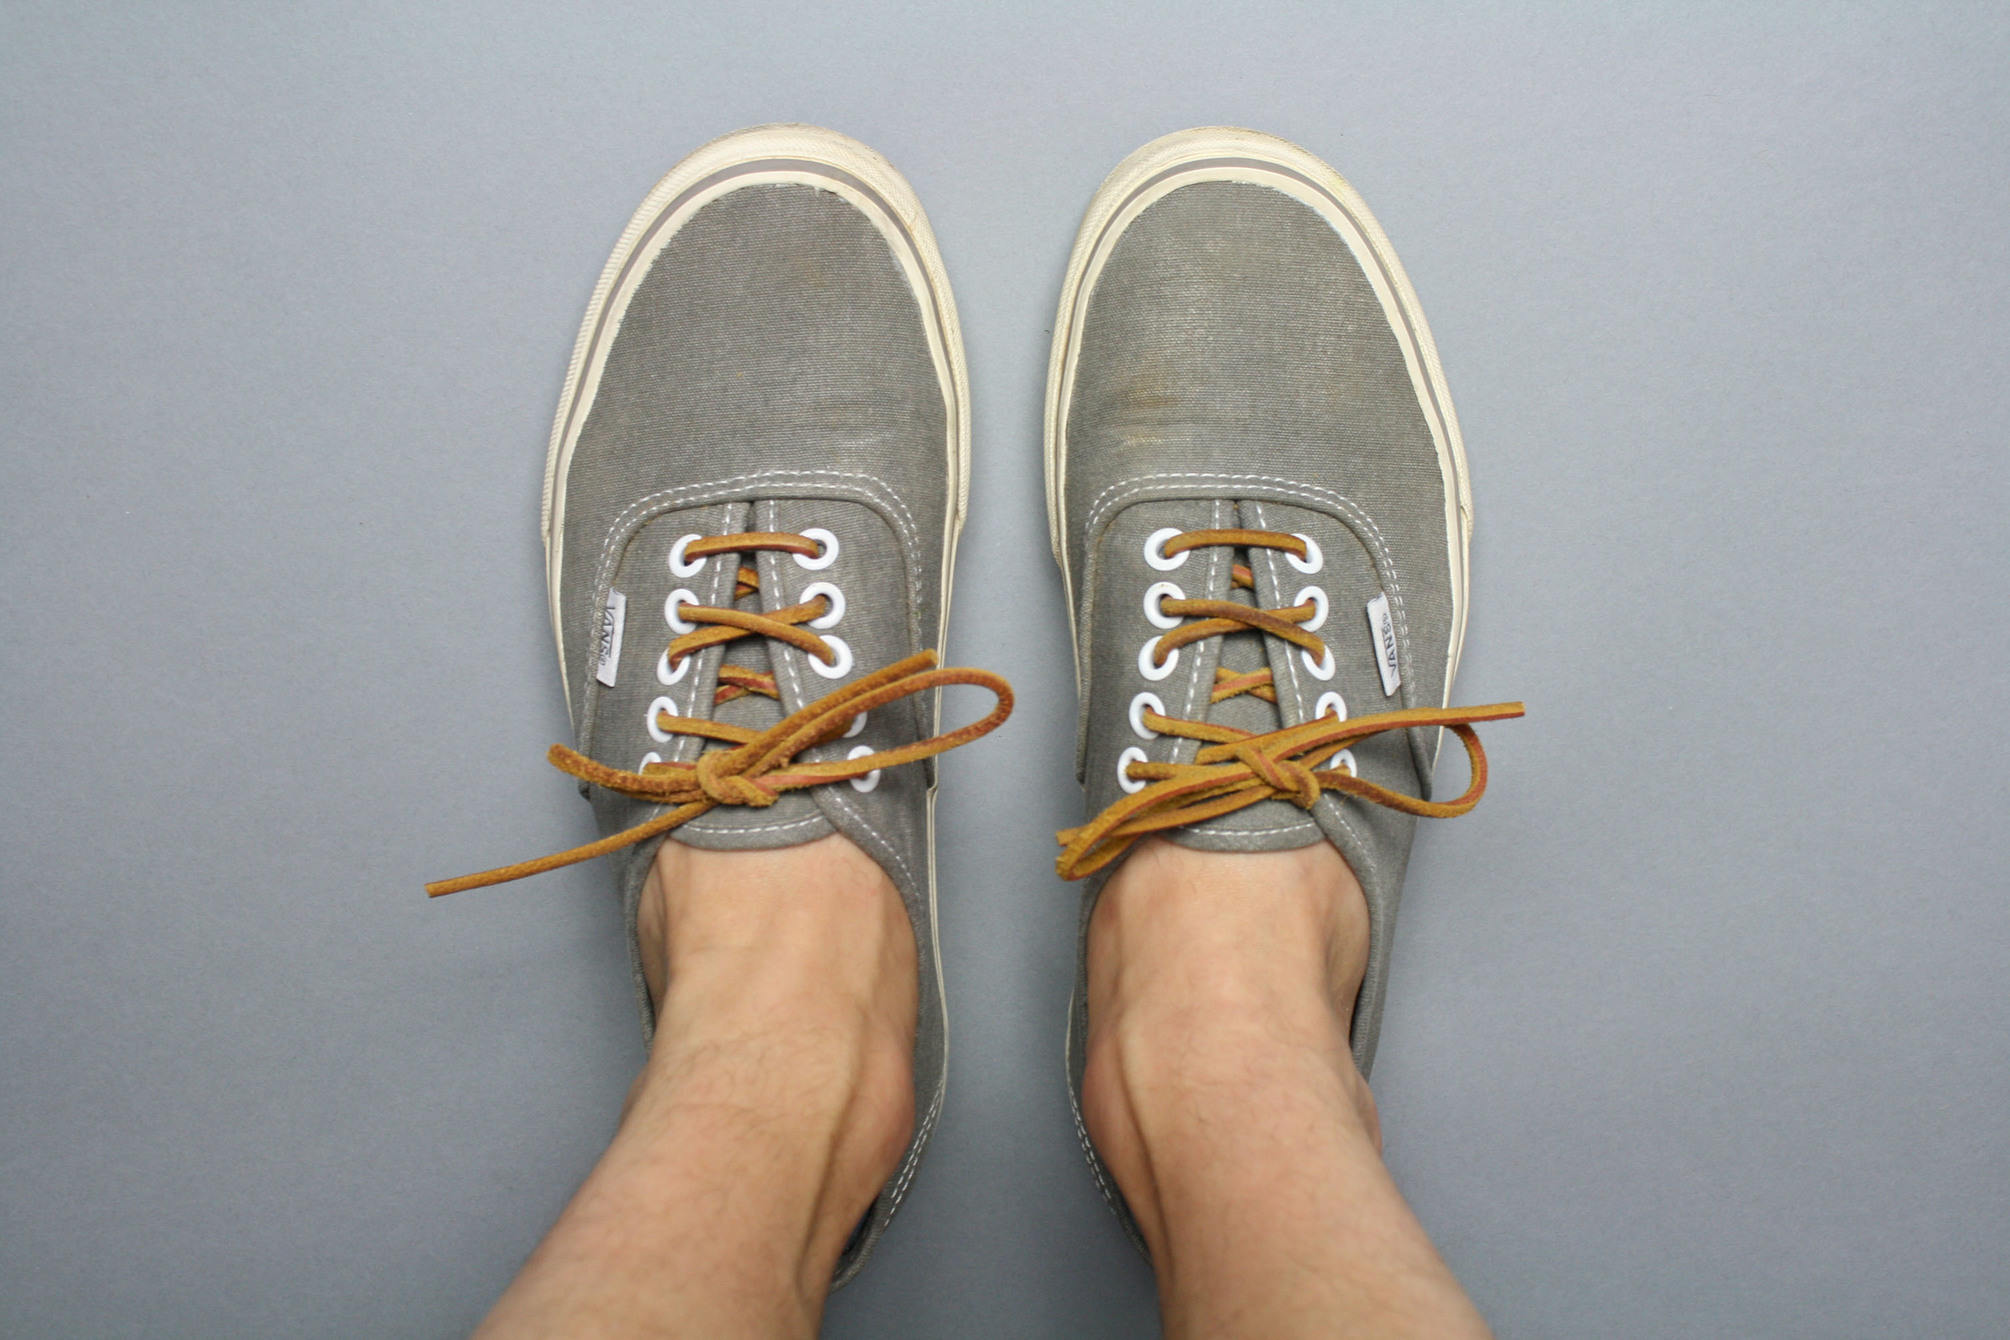 no see socks for boat shoes